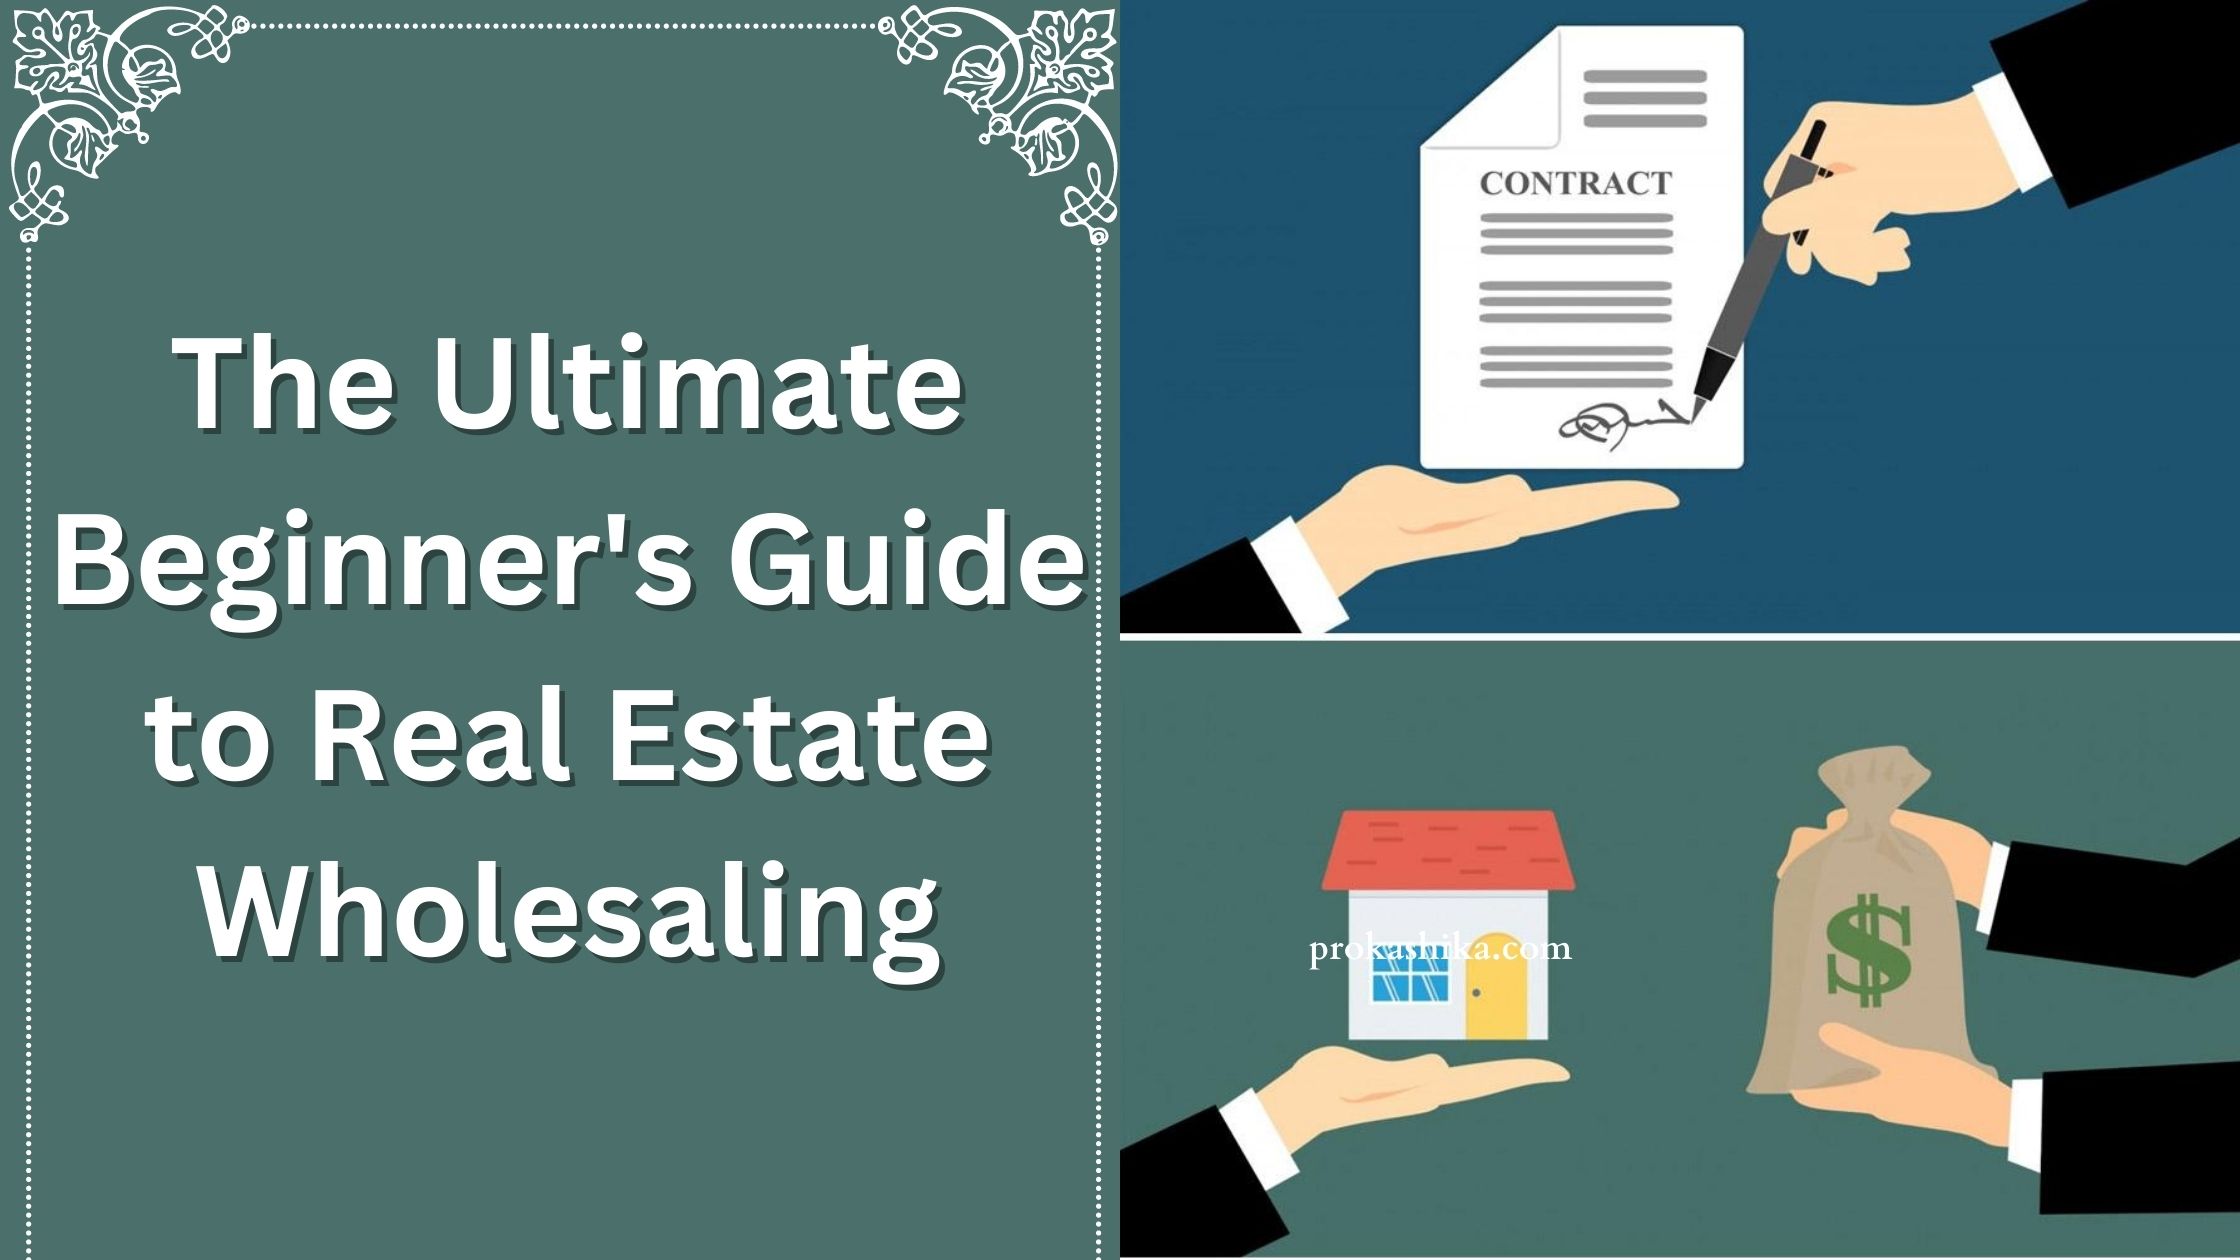 You are currently viewing The Ultimate Beginner’s Guide to Real Estate Wholesaling